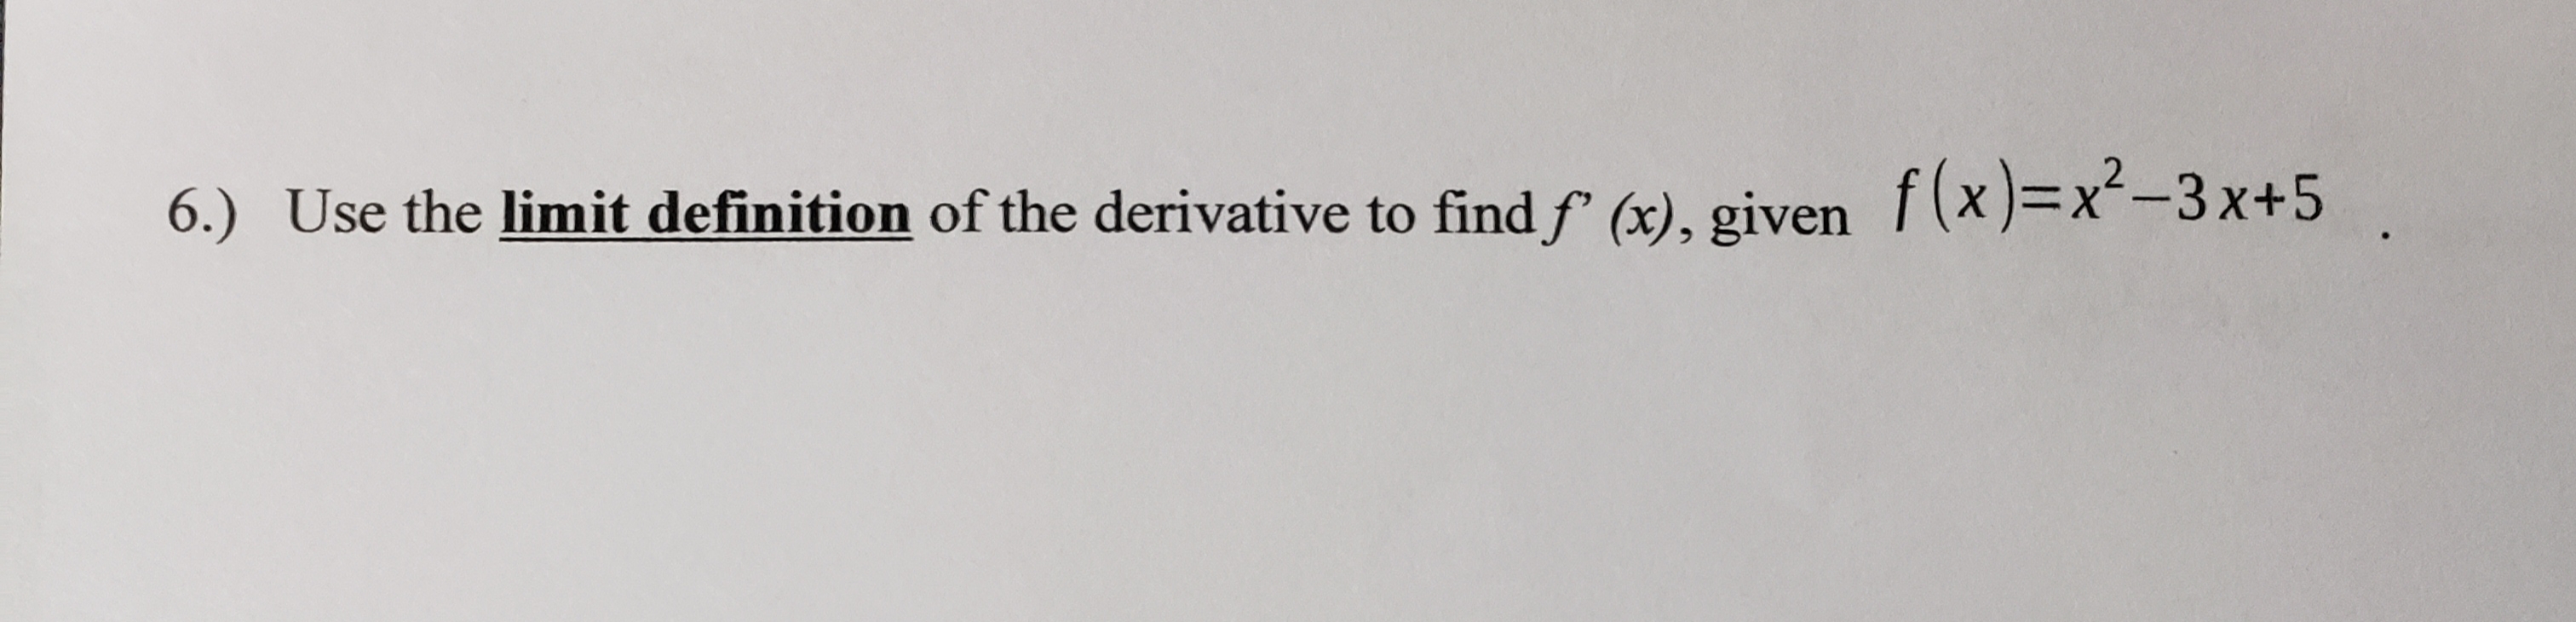 6.) Use the limit definition of the derivative to find f' (x), given f(x)=x-3 x+5
